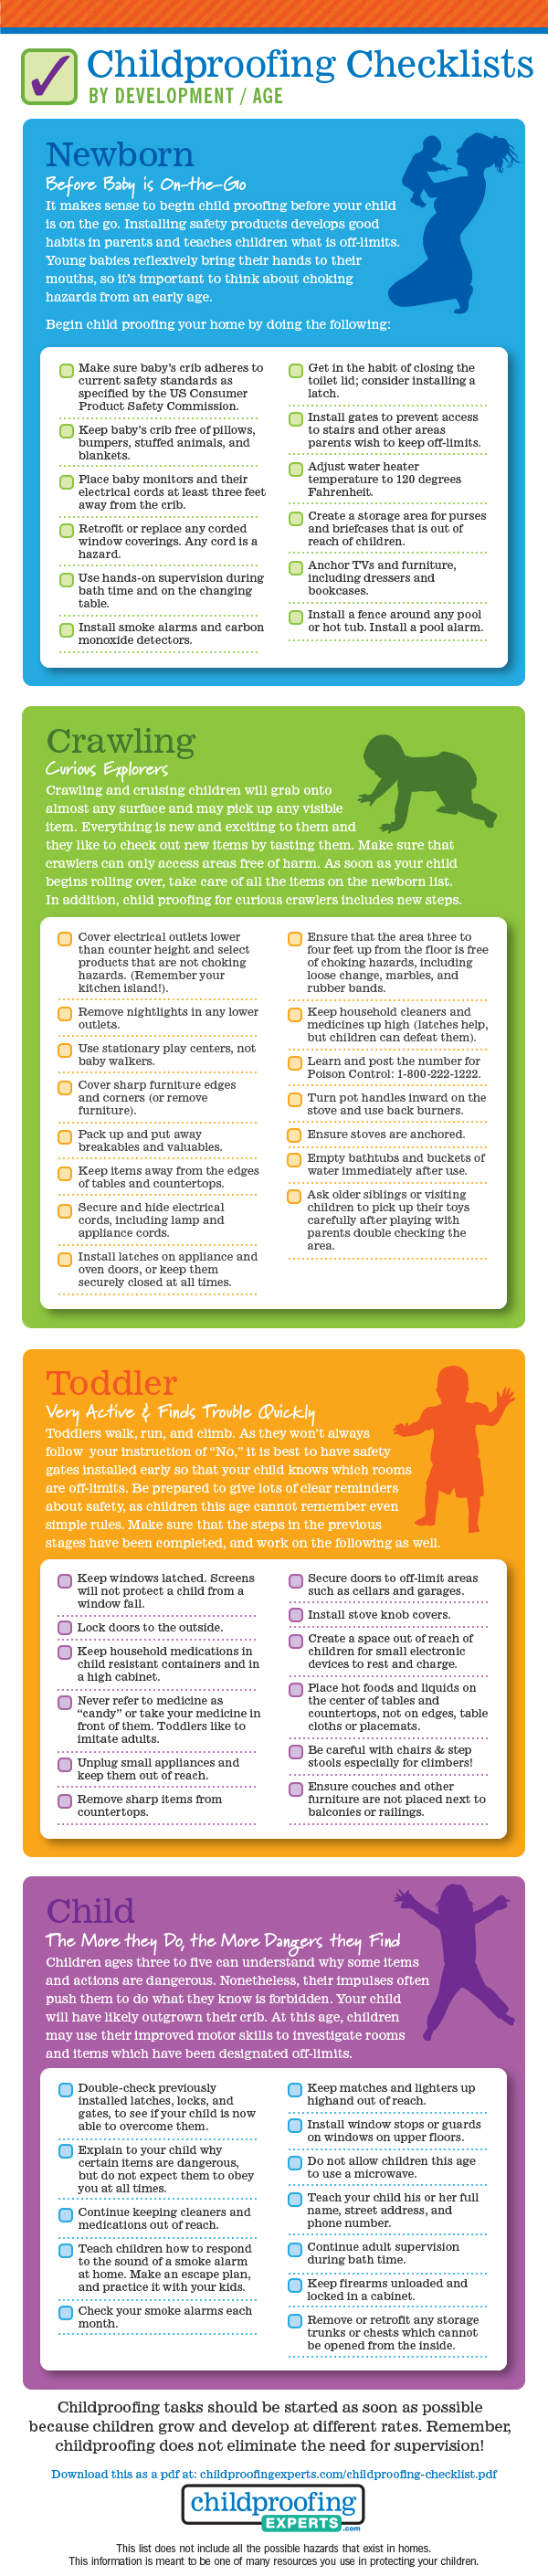 Childproofing Checklist by Age Expert Tips and Advice 4aKid Blog